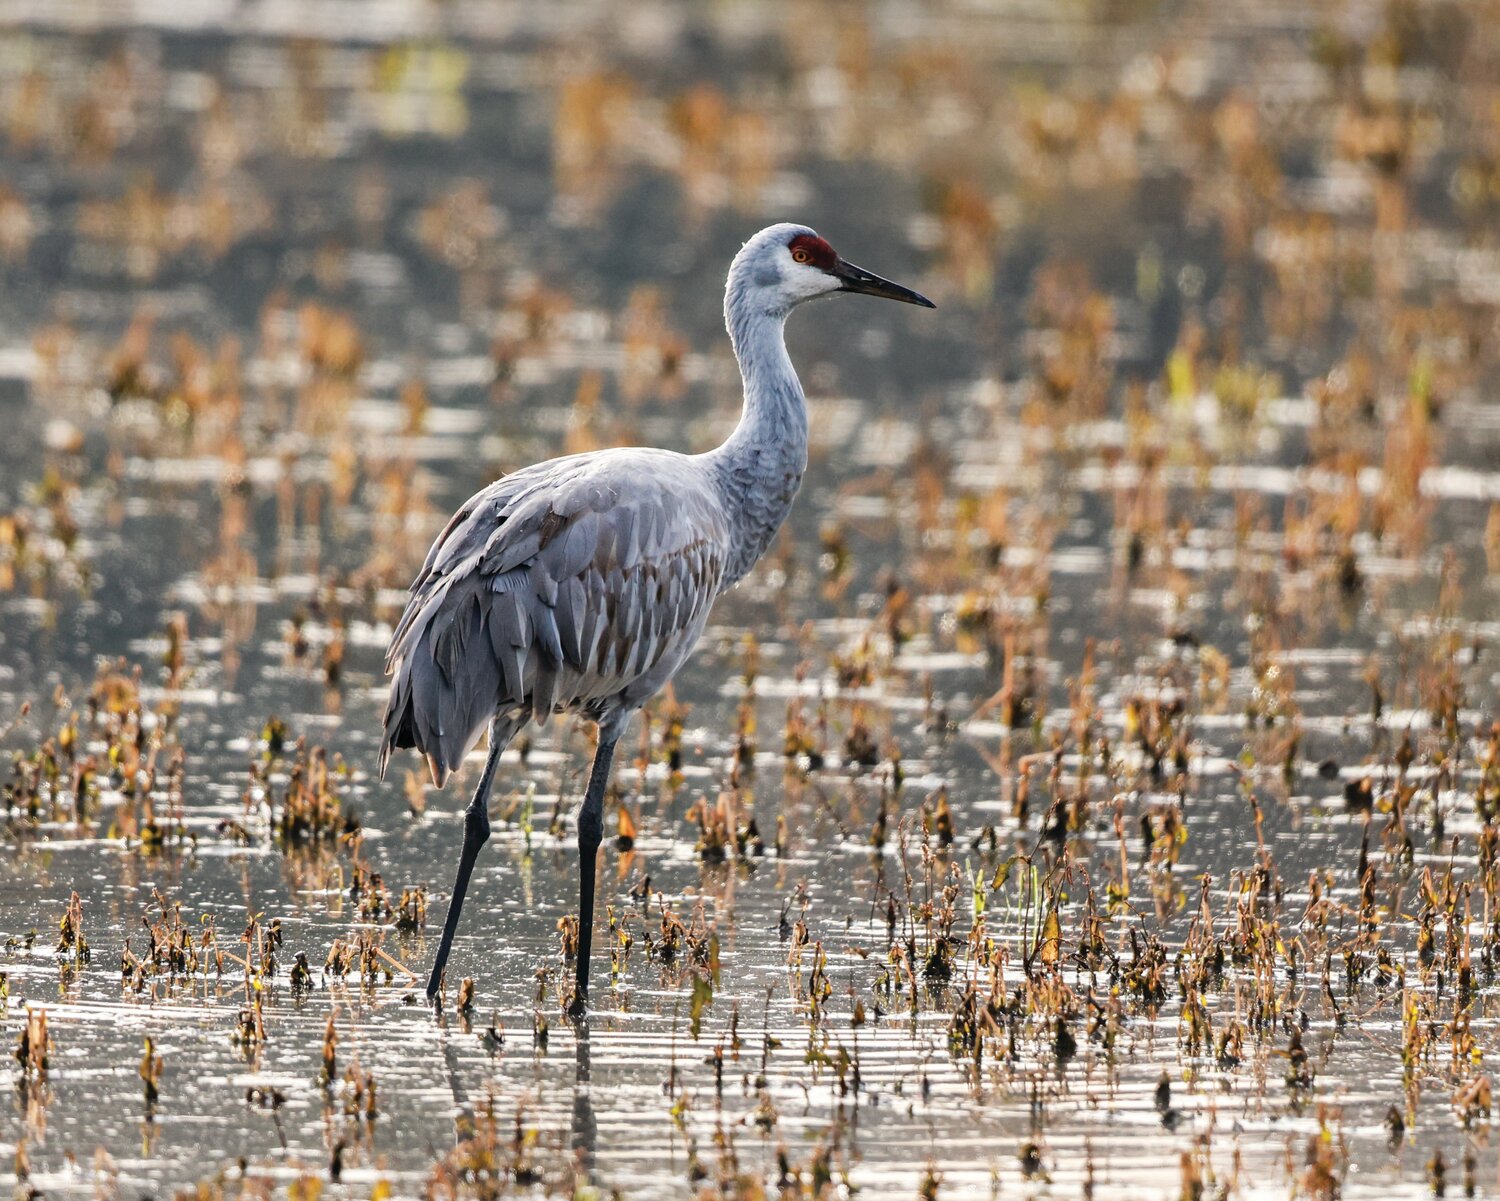 A sandhill crane hangs out in a shallow marsh Tuesday, Oct. 31, at the Ridgefield National Wildlife Refuge’s River “S” Unit.